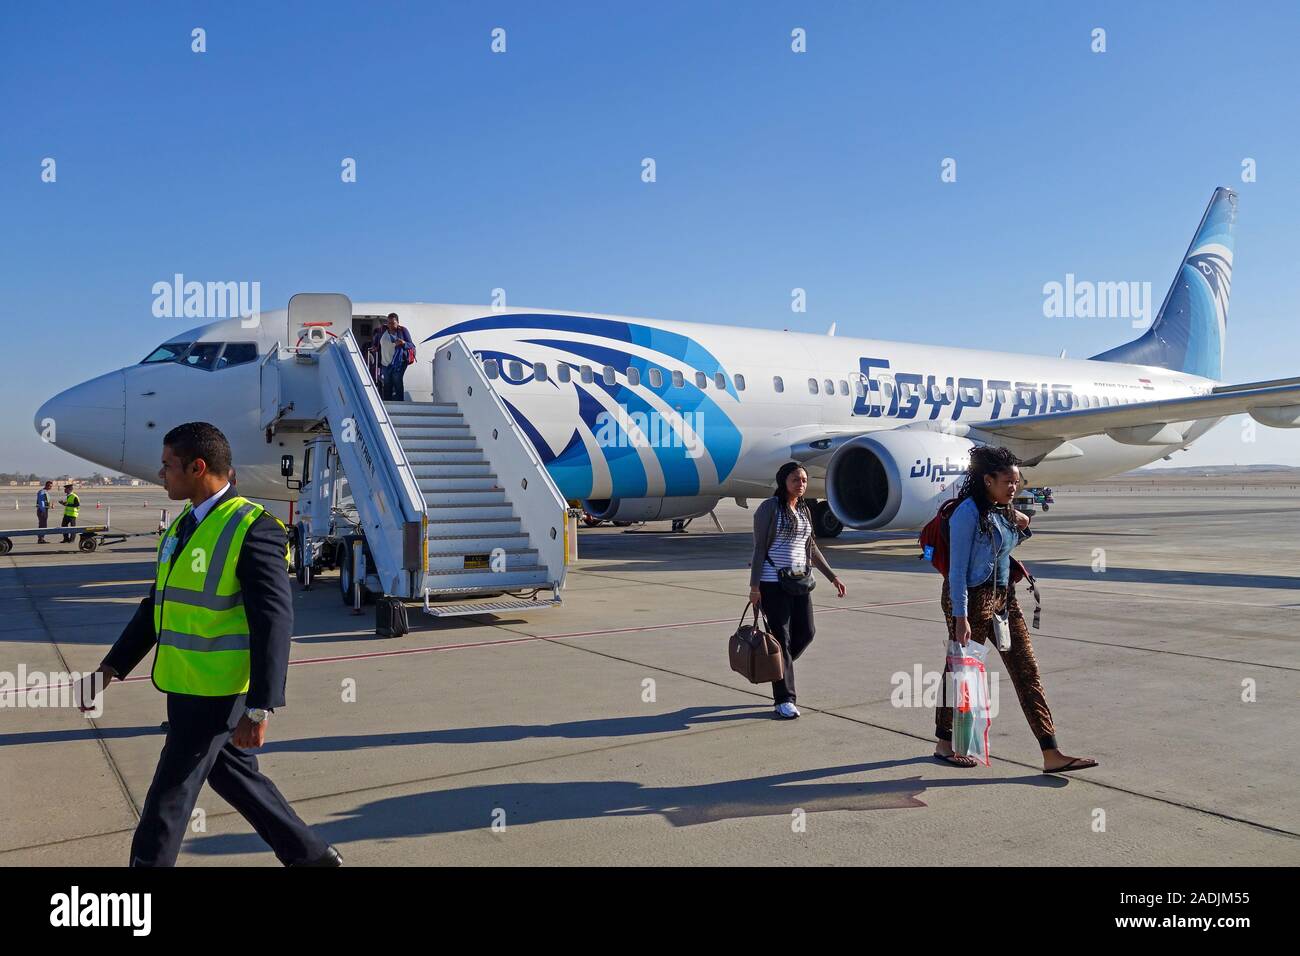 A Boeing 737 Max 800, call sign SU-GCN, an aeroplane, plane or aircraft belonging to the Airline Egyptair, at Luxor International Airport, Egypt Stock Photo